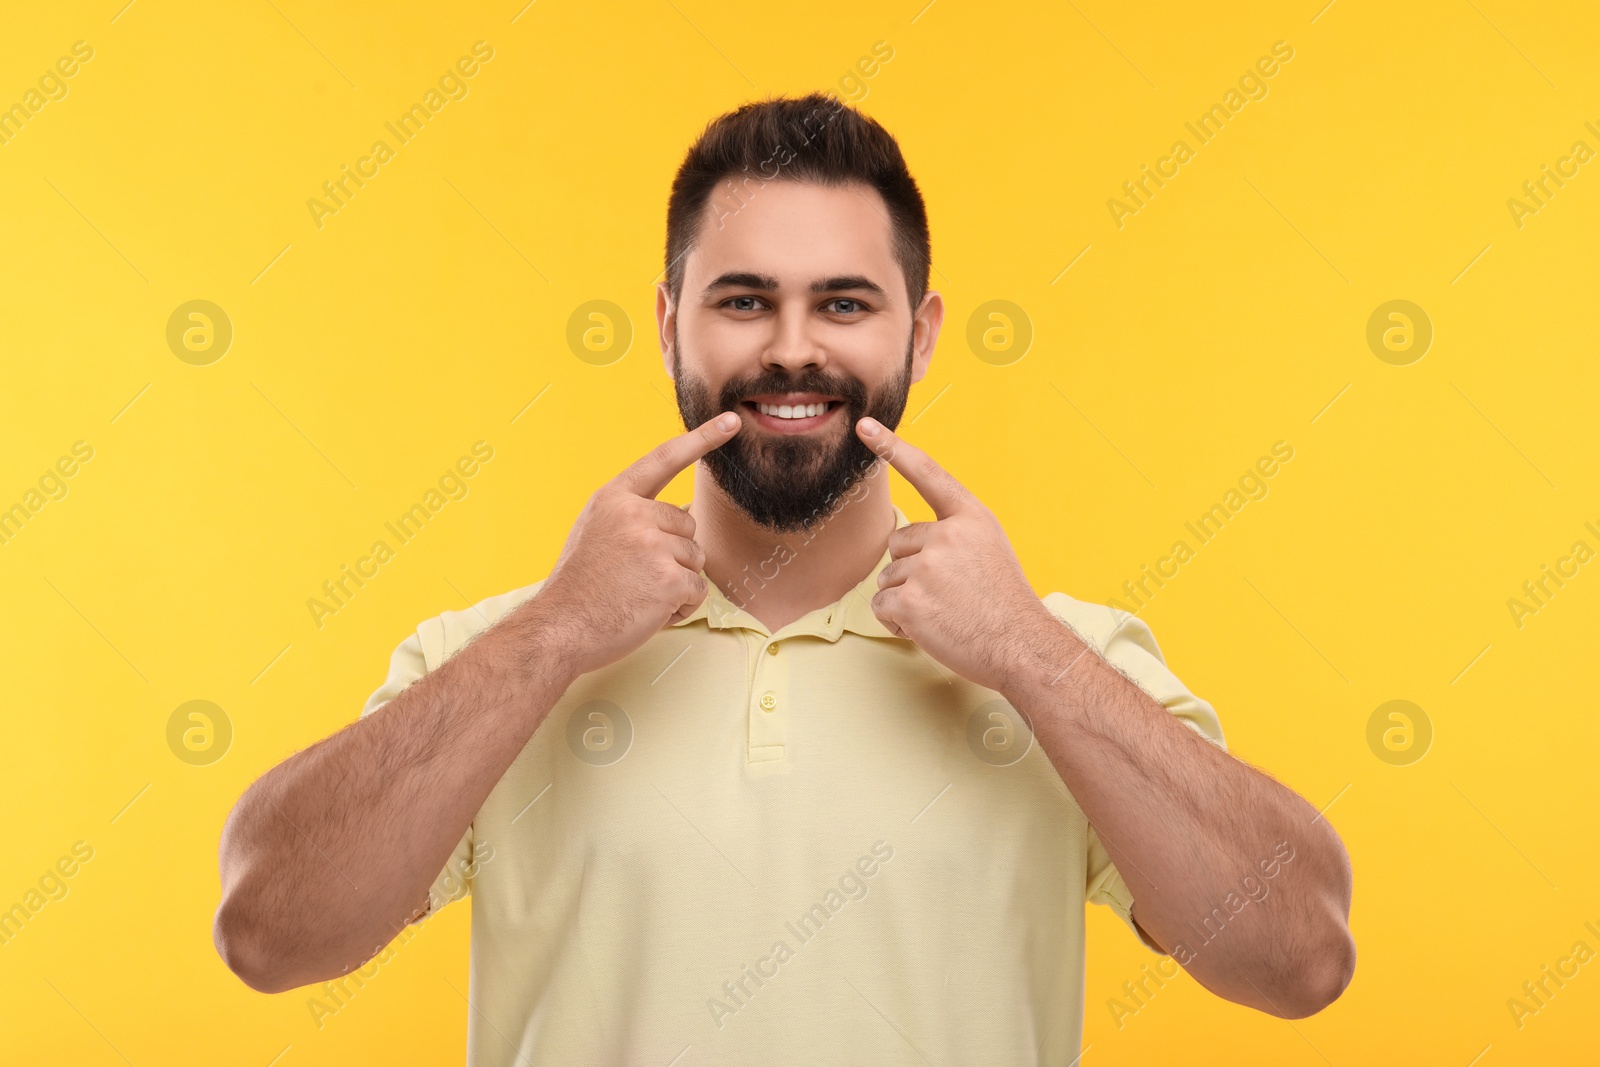 Photo of Man showing his clean teeth and smiling on yellow background